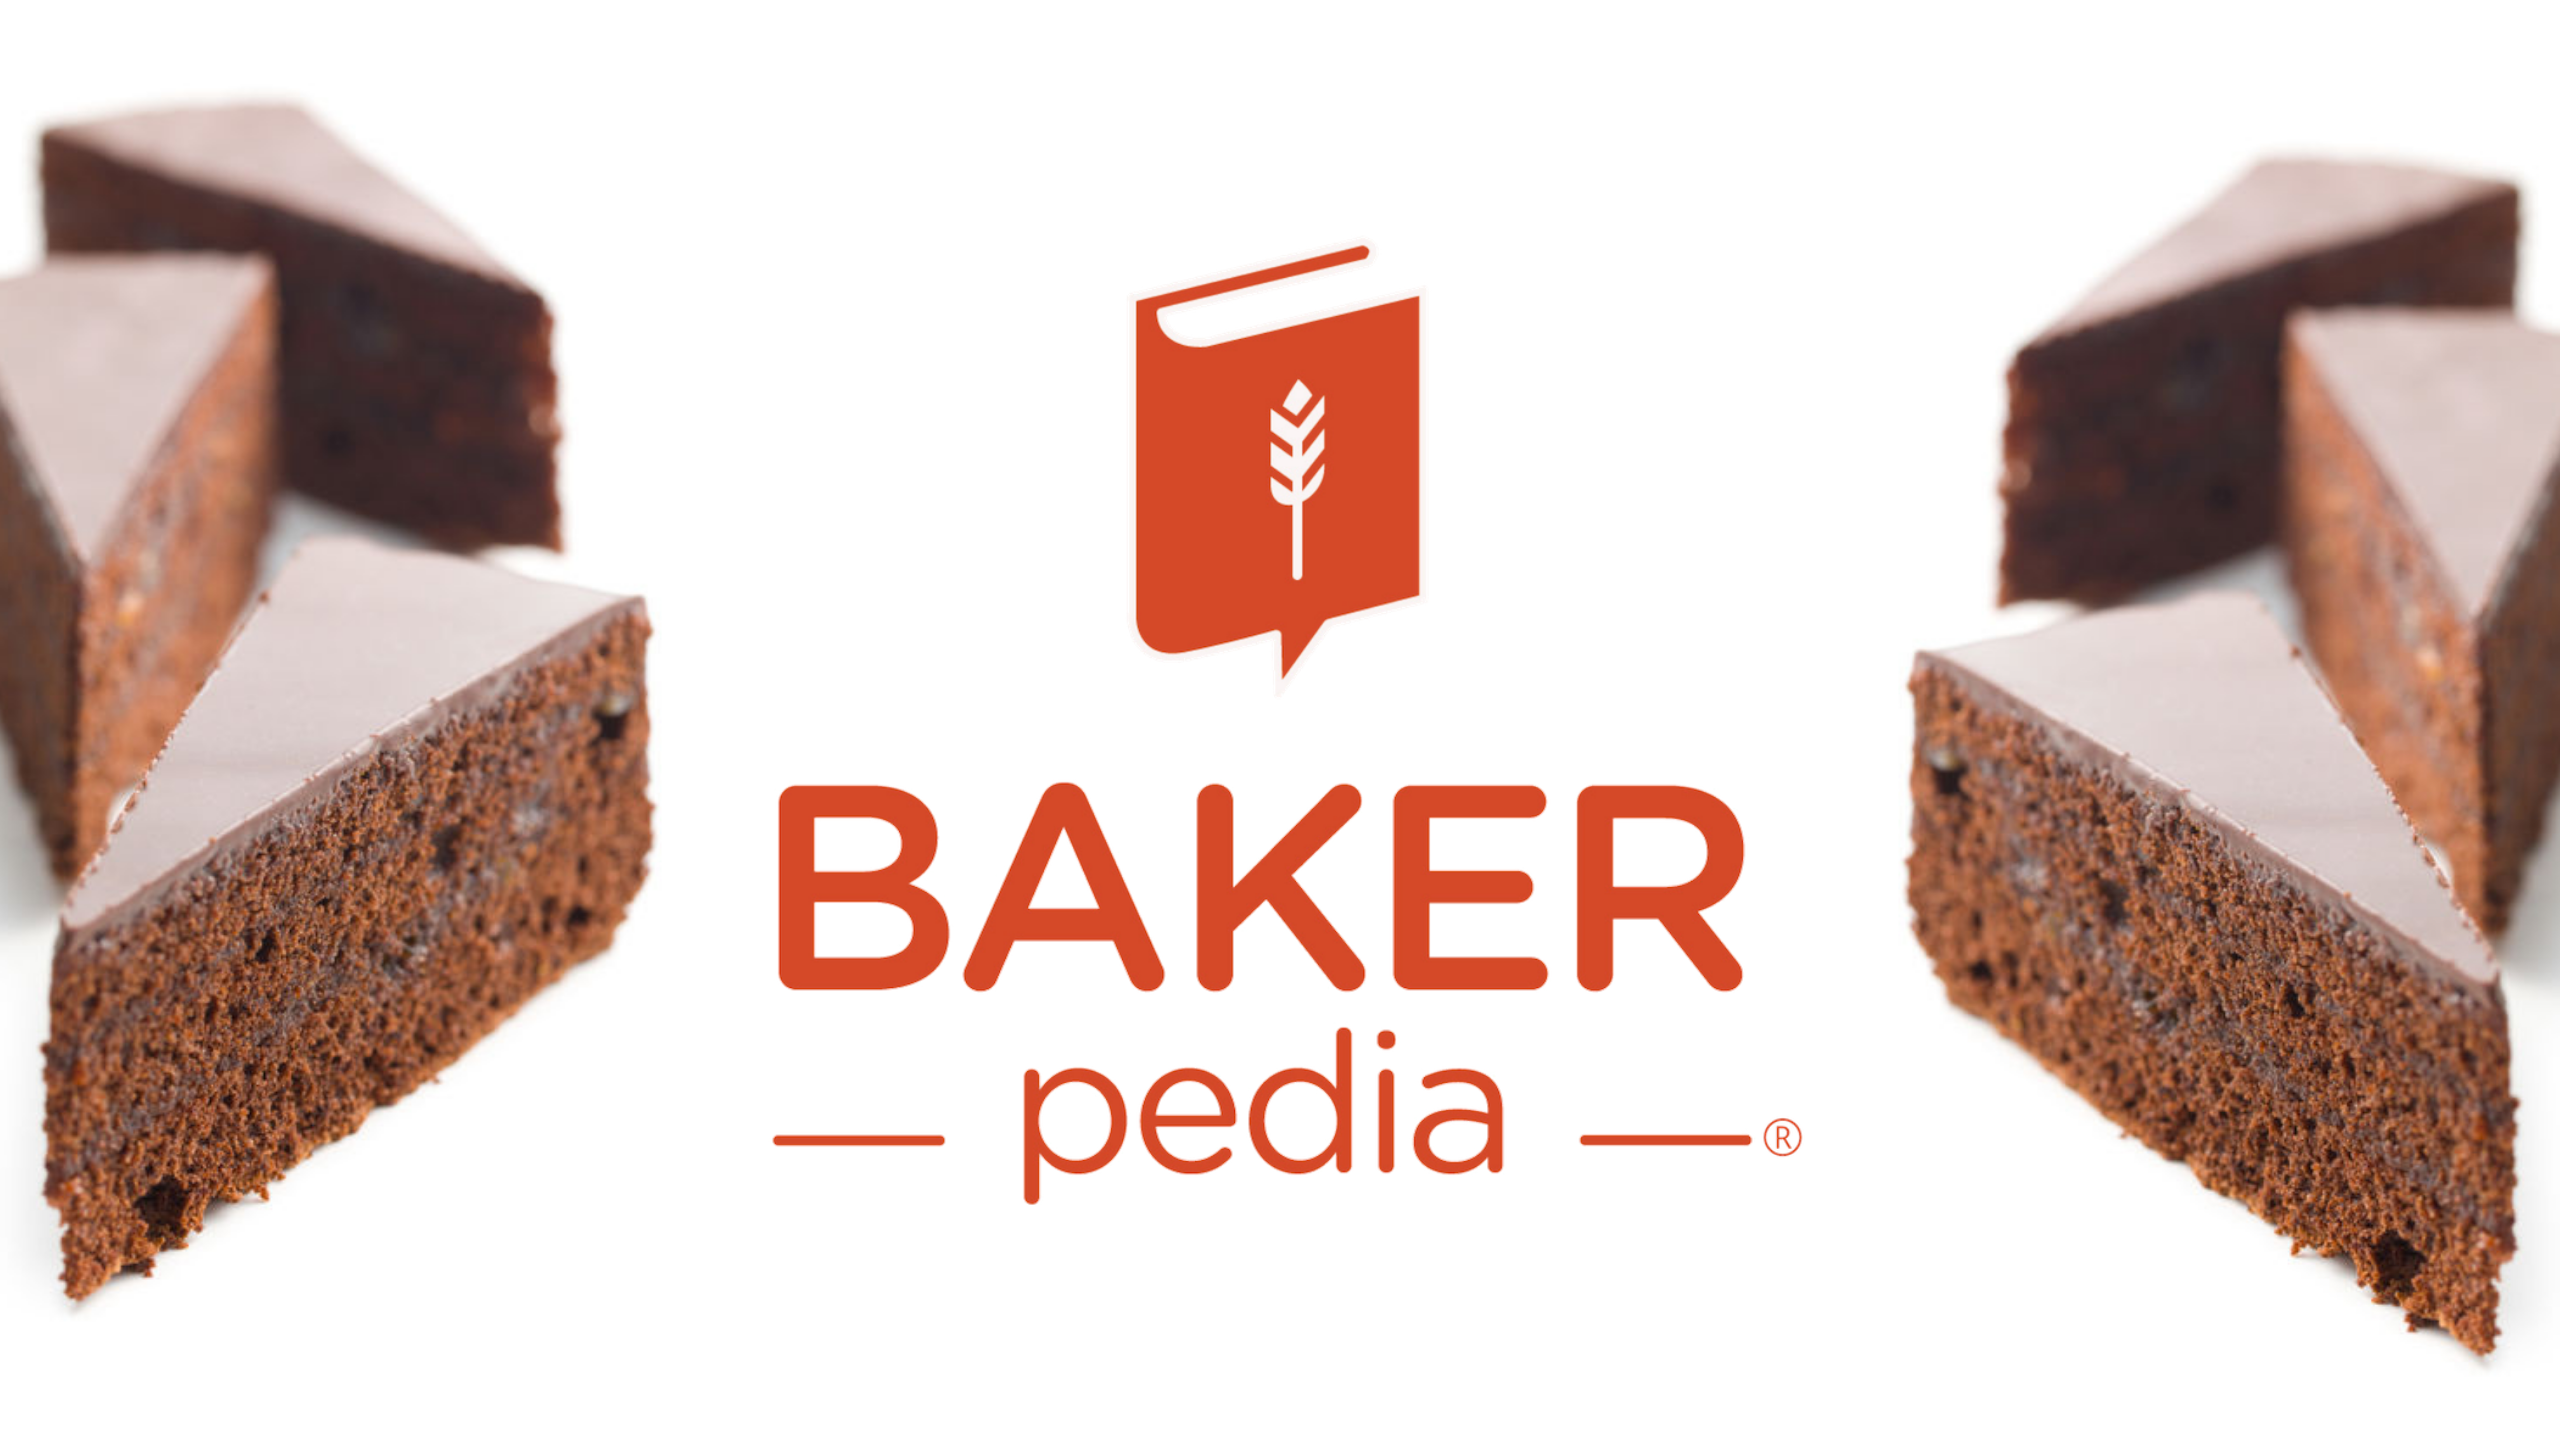 Shared knowledge. Freely available. Always. BAKERpedia